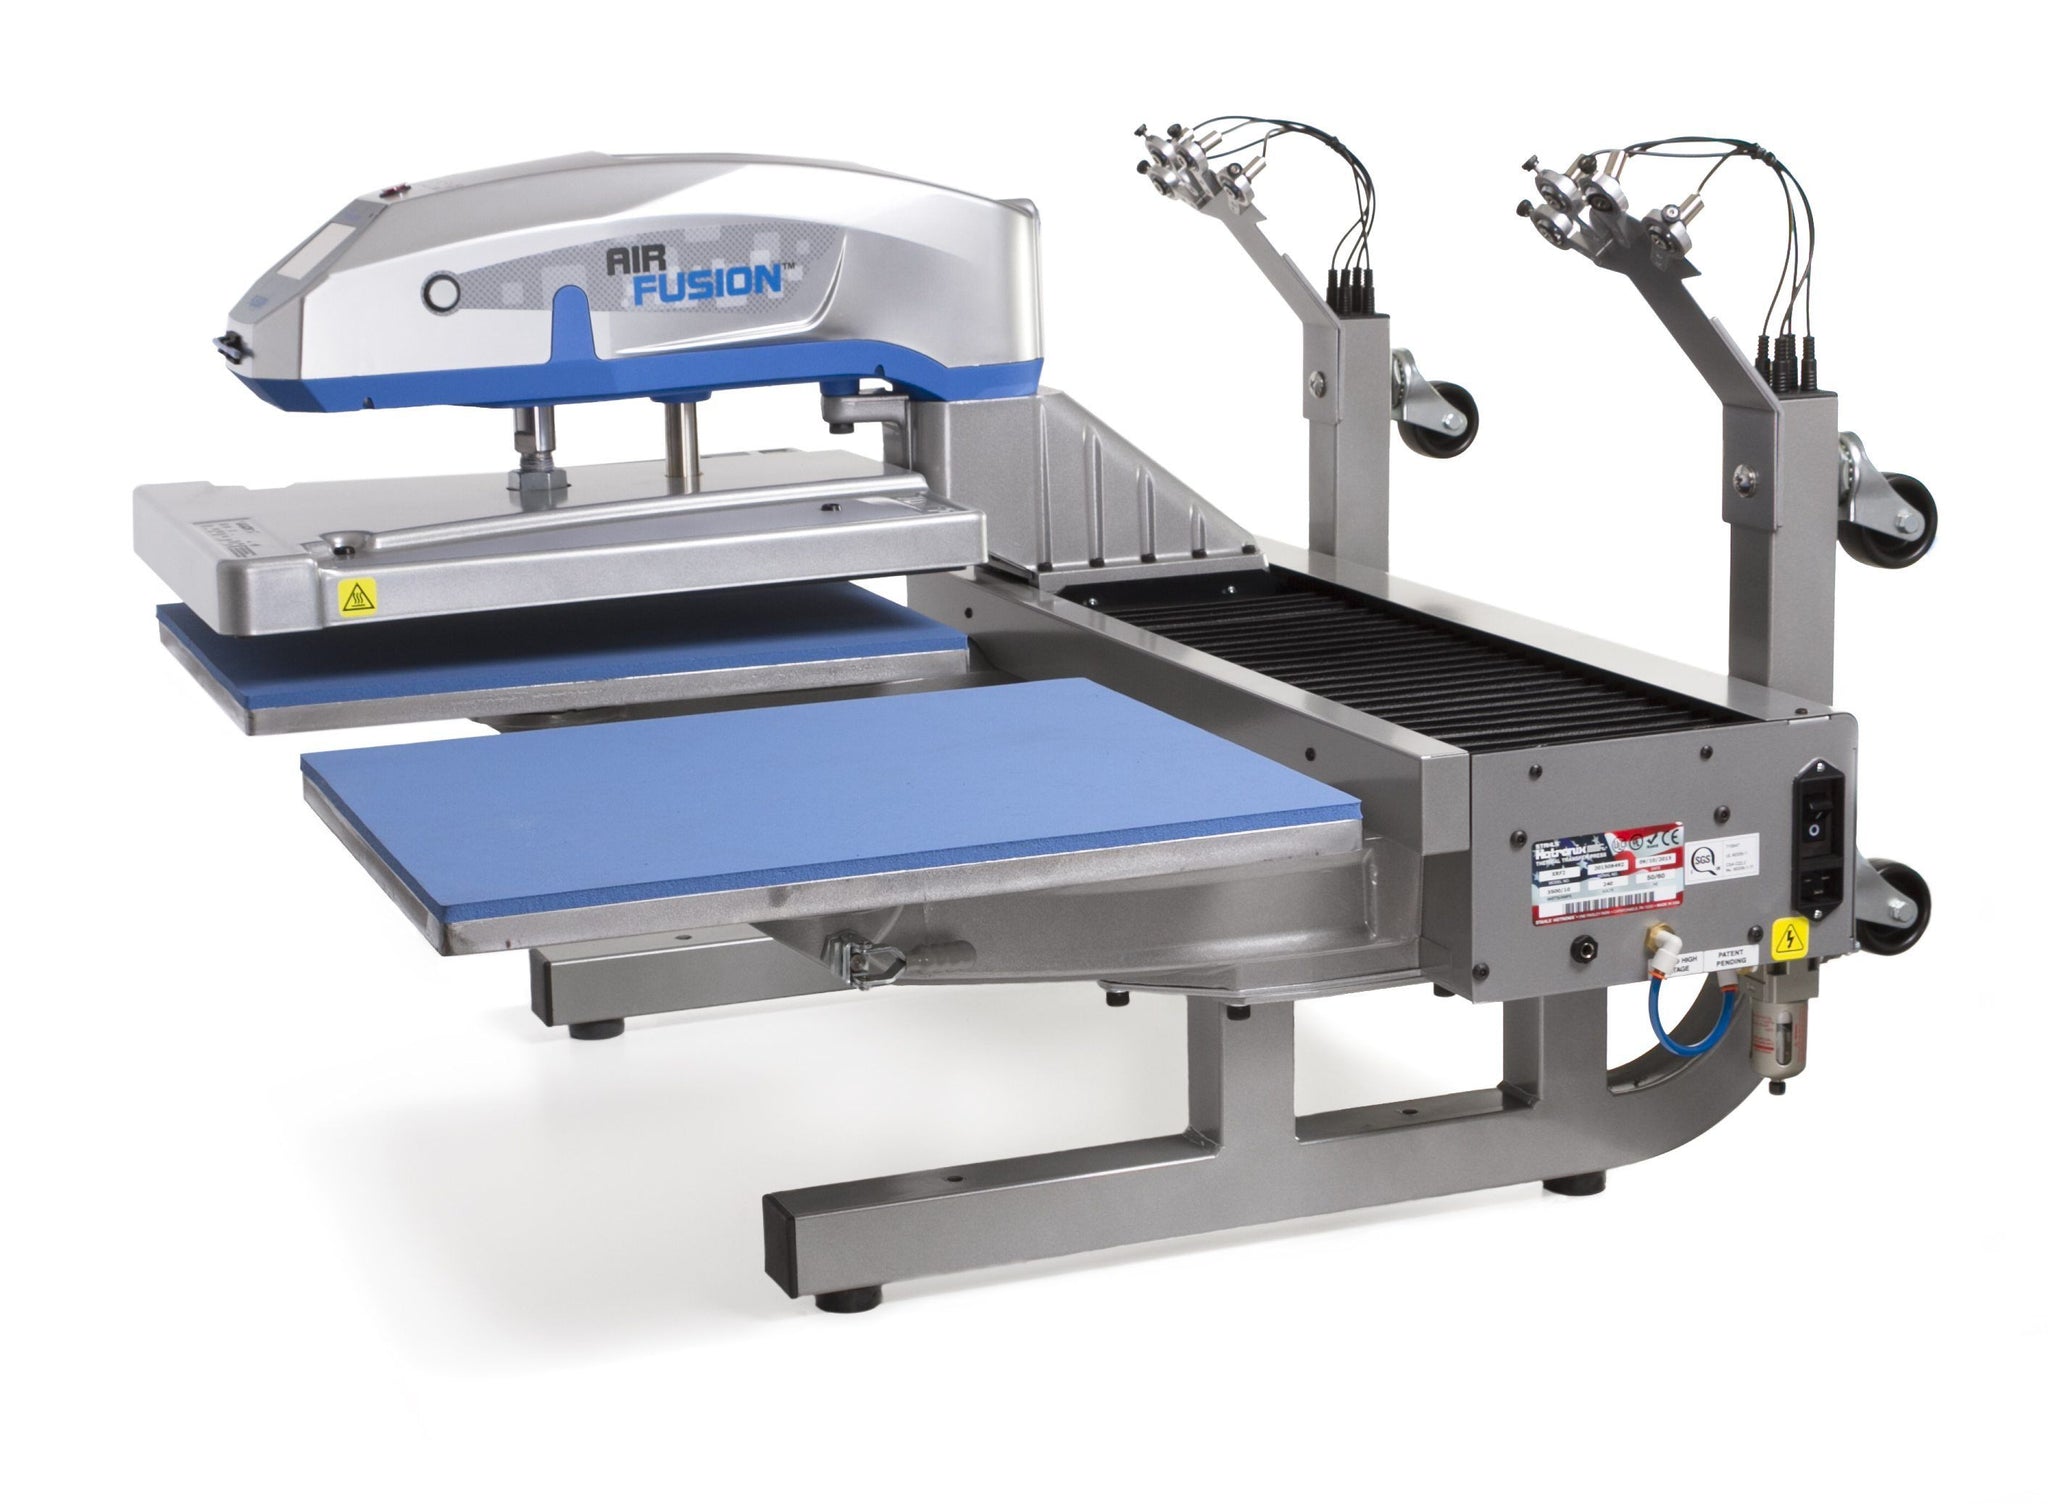 Hotronix Air Fusion IQ Table-Top Heat Press - Epson SureColor & HP Printers  - Dye Sub, DTG, Sign, Photo & Giclee